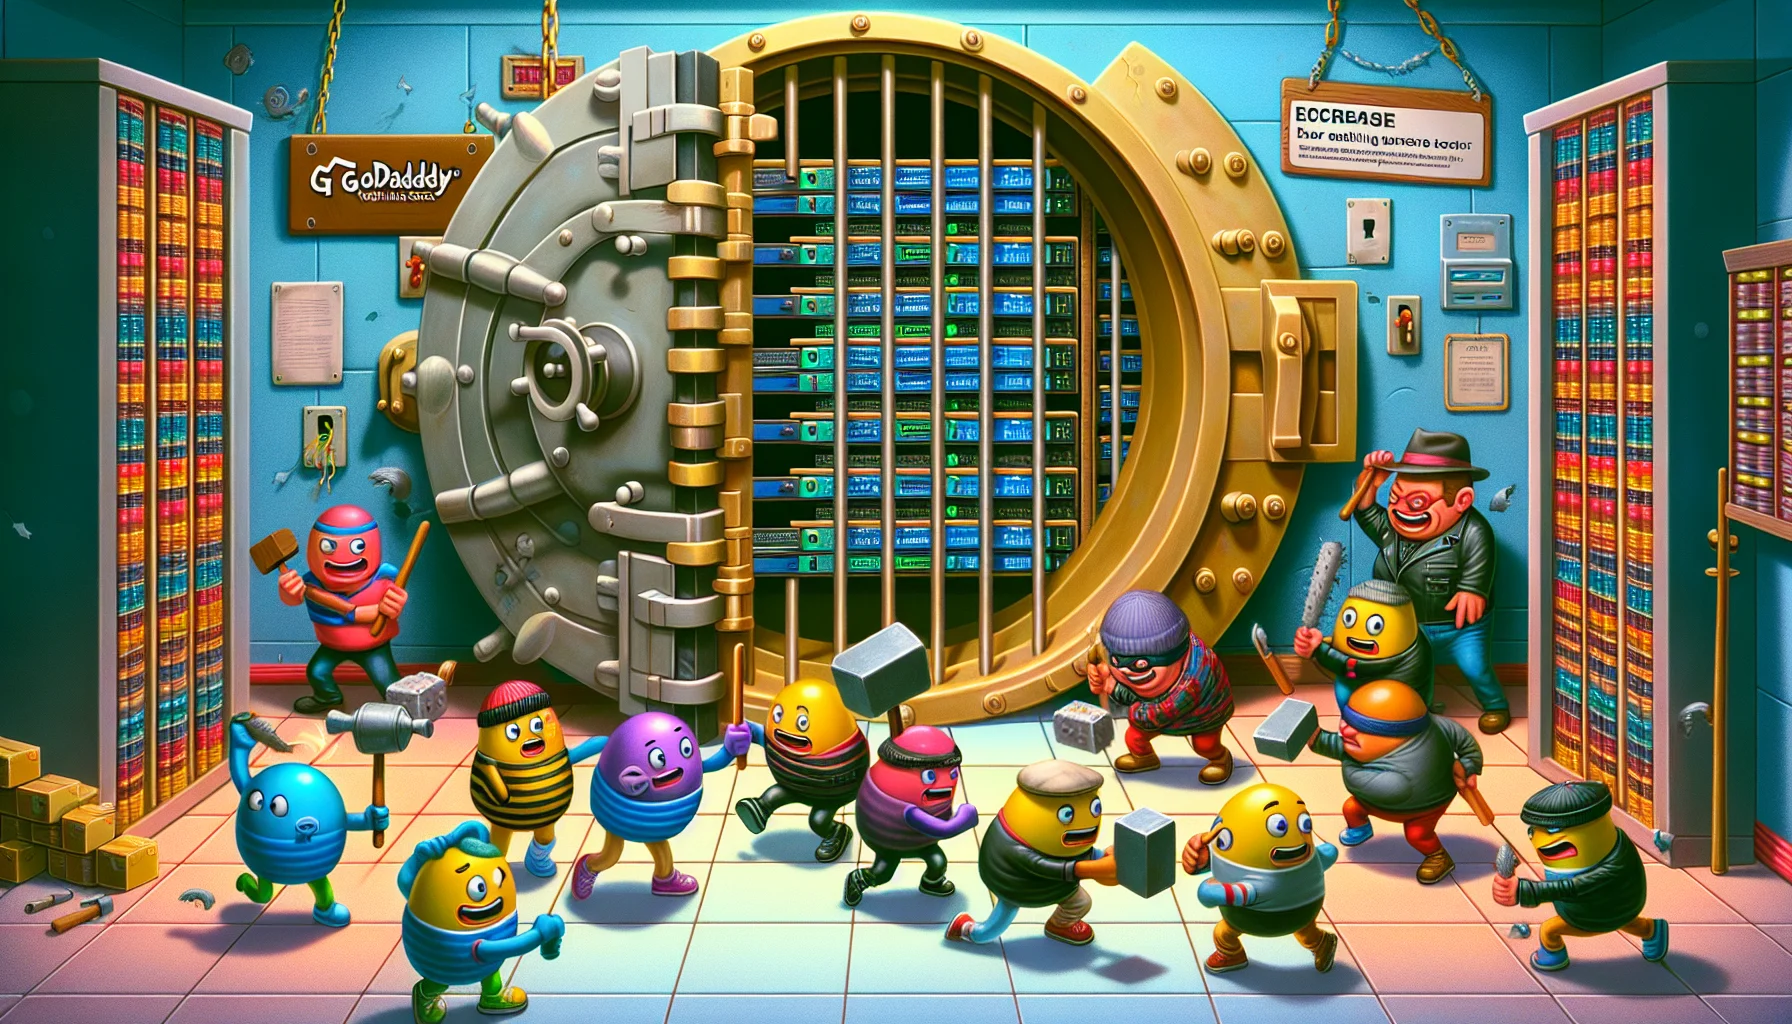 A colorful scene set within the inside of a whimsical computer server room. A database represented as a cartoon structure resembling a classic bank vault refuses to open its massive locked door. Various cartoon characters representing data packets rush toward the door but bounce back humorously. Some data packets are seen holding battering rams or lock-picking tools, some are even dressed like thieves, all displaying funny expressions of frustration and confusion. There's a signpost next to the vault displaying 'GoDaddy Web Hosting Service'. The atmosphere should be light-hearted and funny, definitely not technical or too intimidating, yet subtly suggesting the issue of error establishing a database connection.